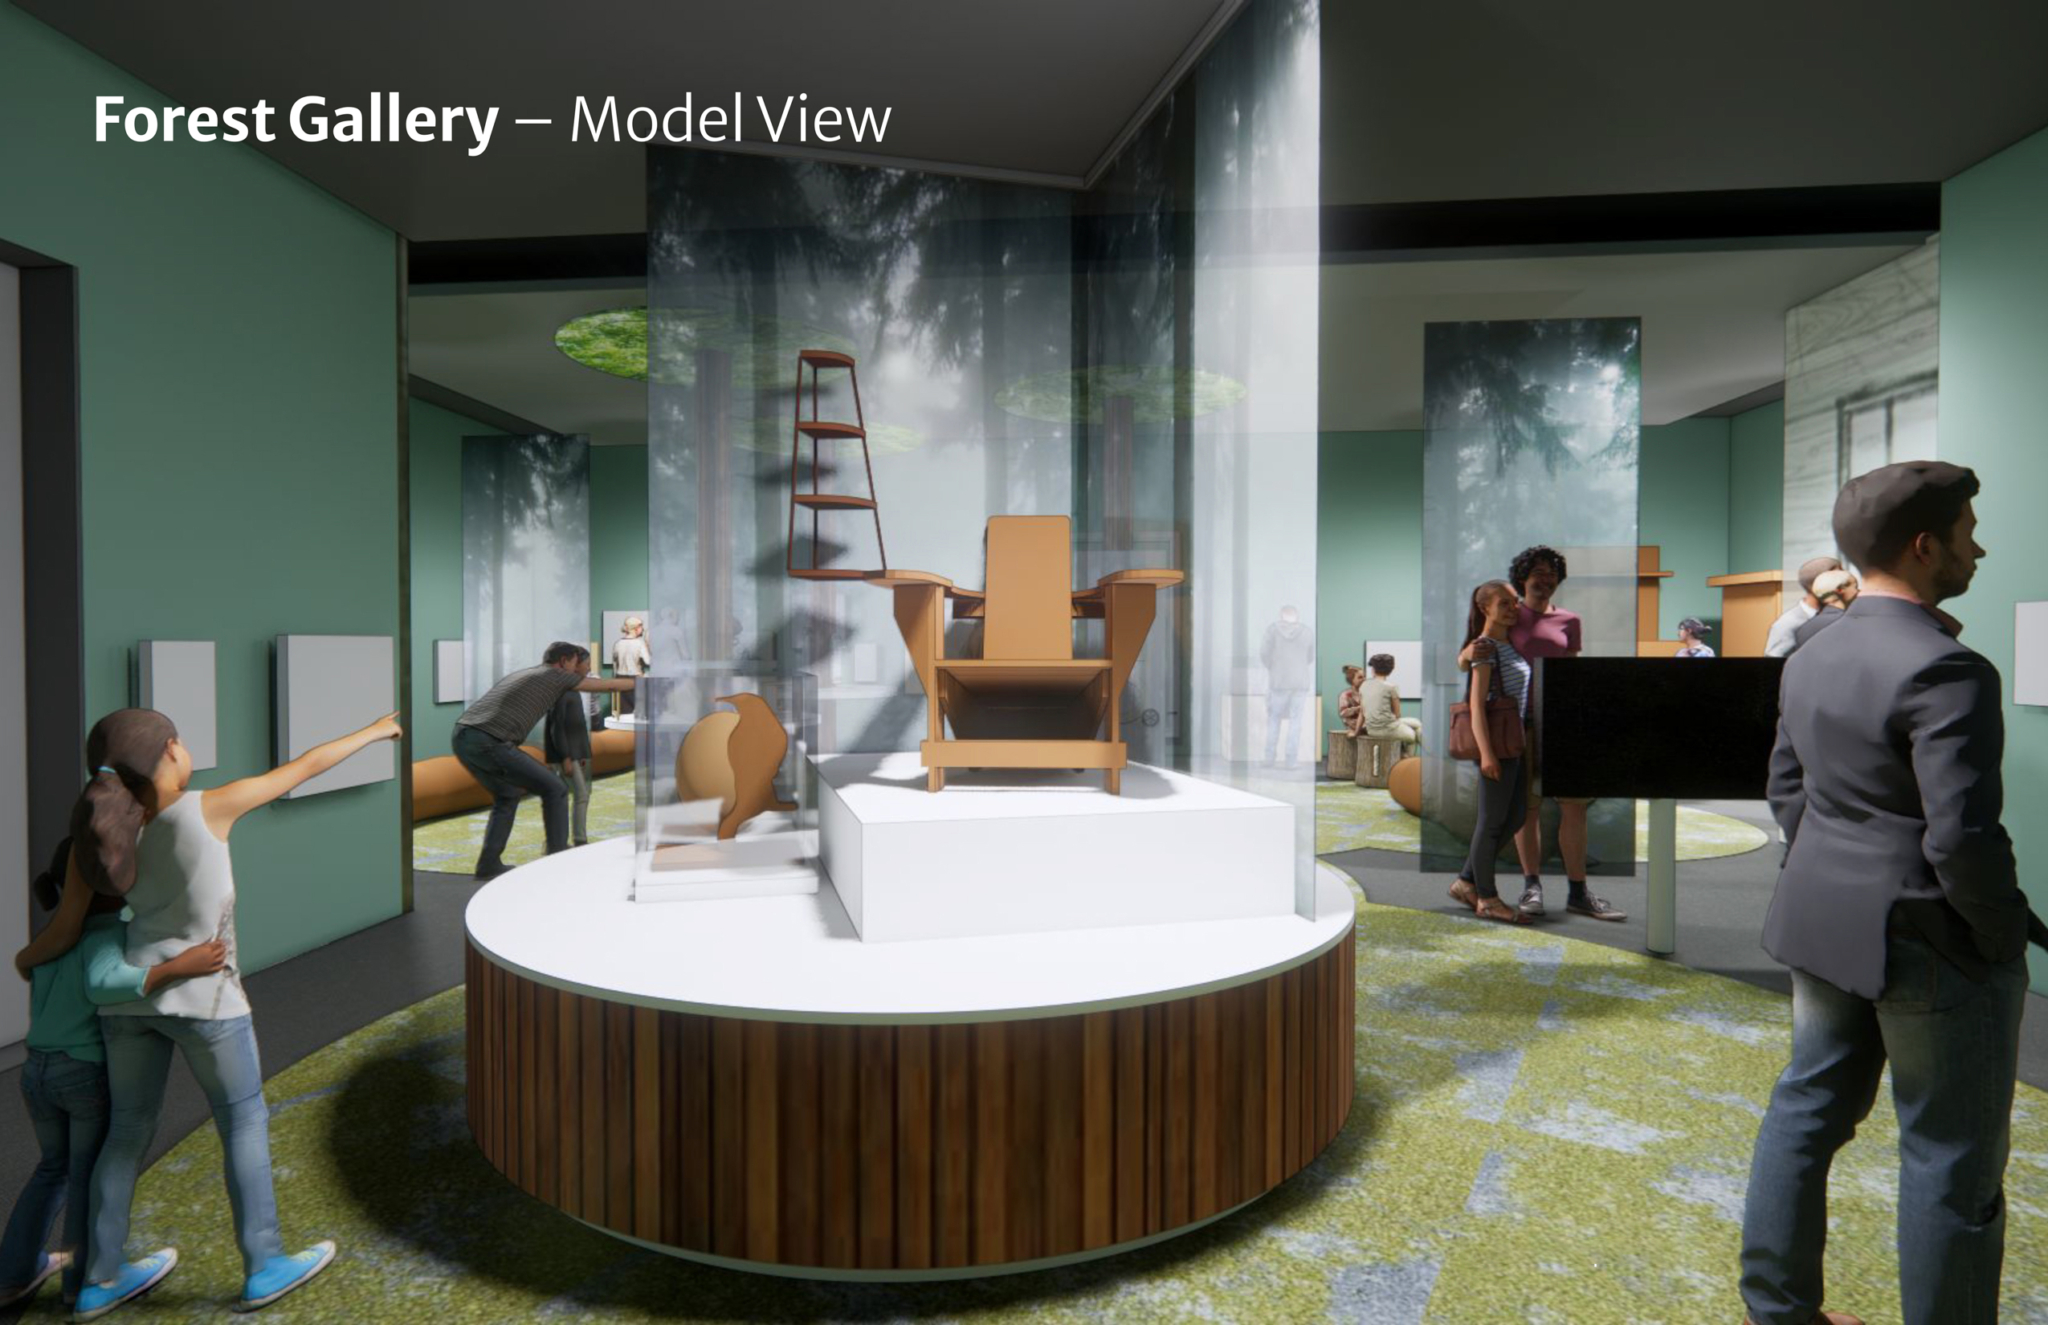 Rendering of the upcoming Artists & Inspiration in the Wild exhibition showing the Forest Gallery.